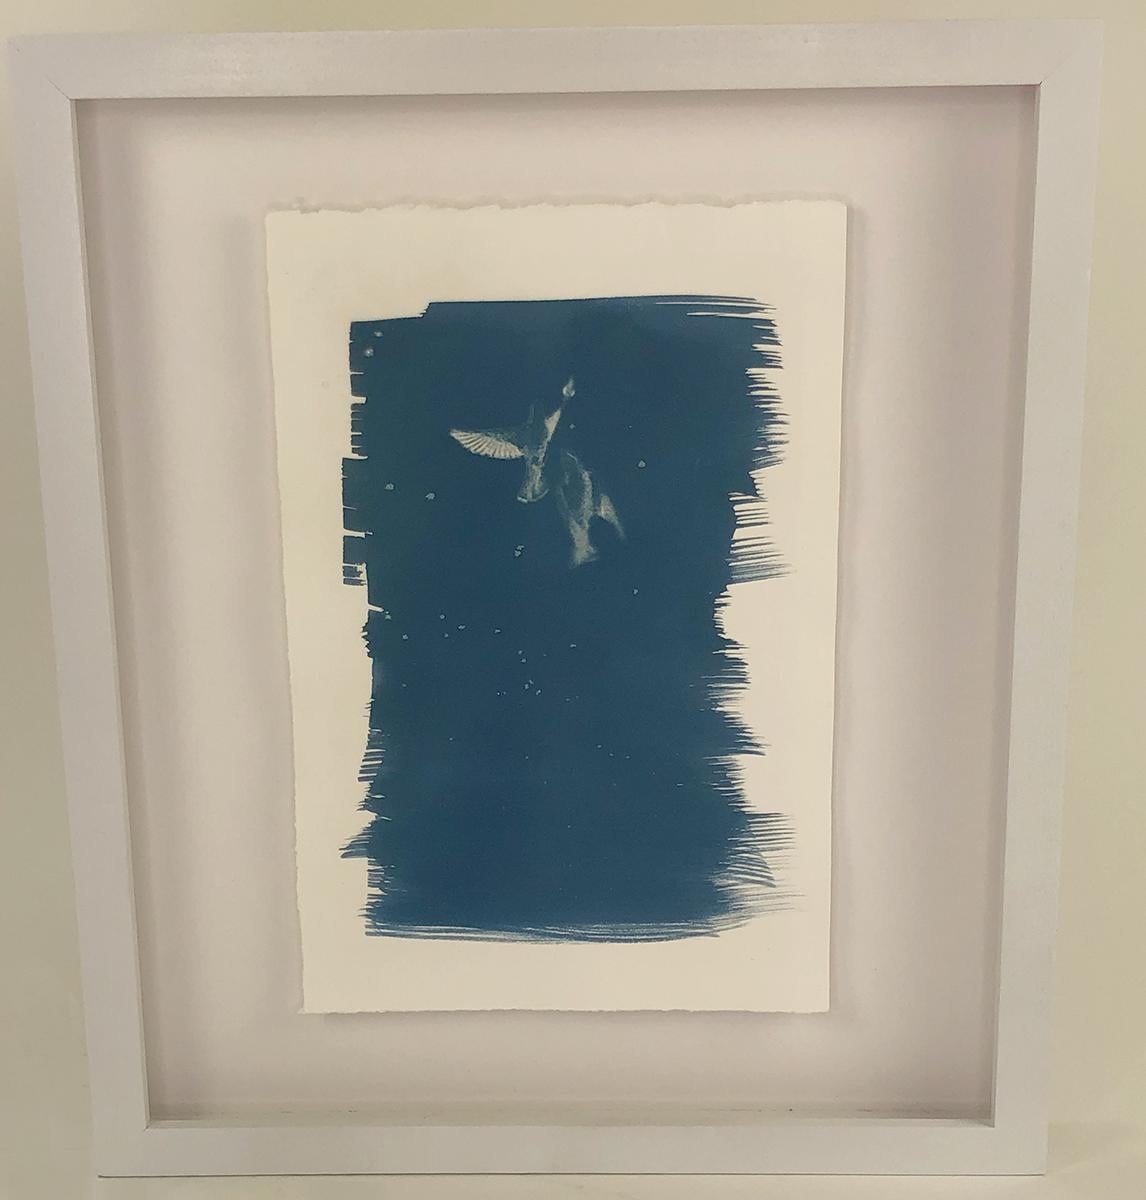 This set of elegantly framed cyanotype prints were created by Artist Sarah L. Morton in 2021. Sarah is an alternative process & abstract artist from Atlanta, GA. All prints are cyanotype on Stonehenge paper floated in an open frame.

‘Lovers’